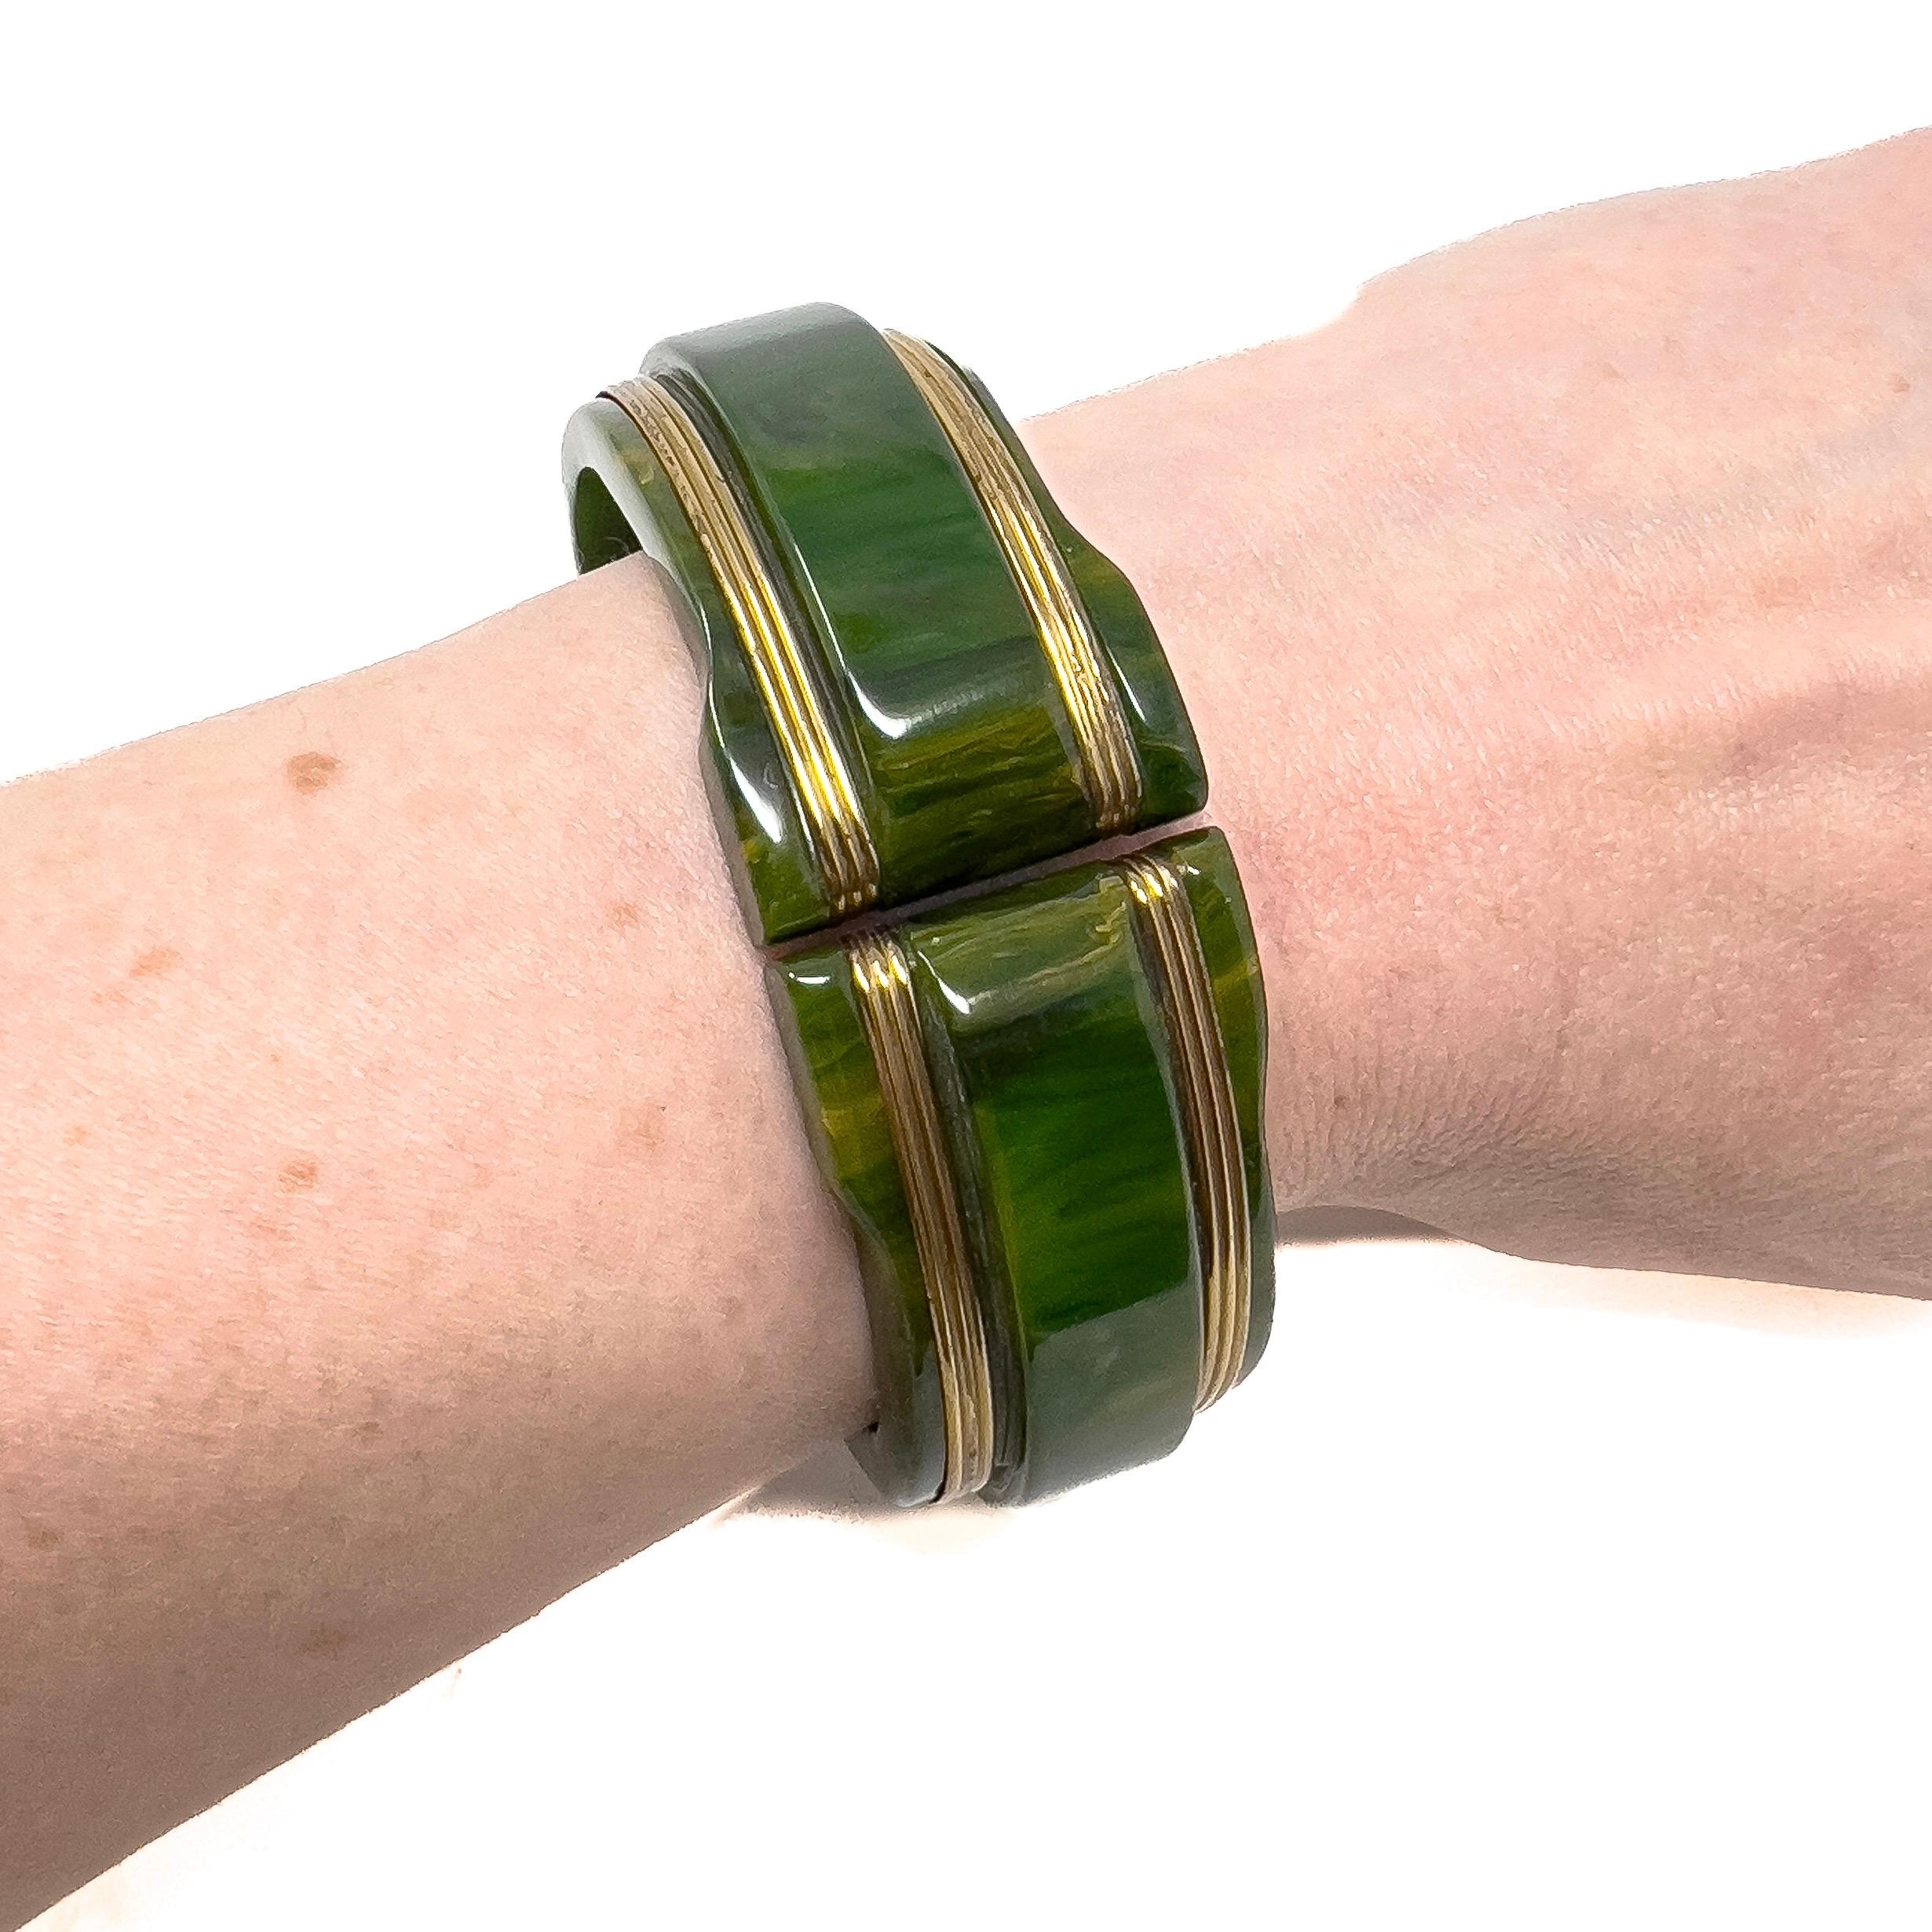 This stylish example of Bakelite jewellery dates from the 1930s. 

Condition Report:
Excellent

The Details...
This hinged cuff is constructed from marbled green Bakelite. It is detailed with 4 gilded metal bands. The internal diameter of this cuff